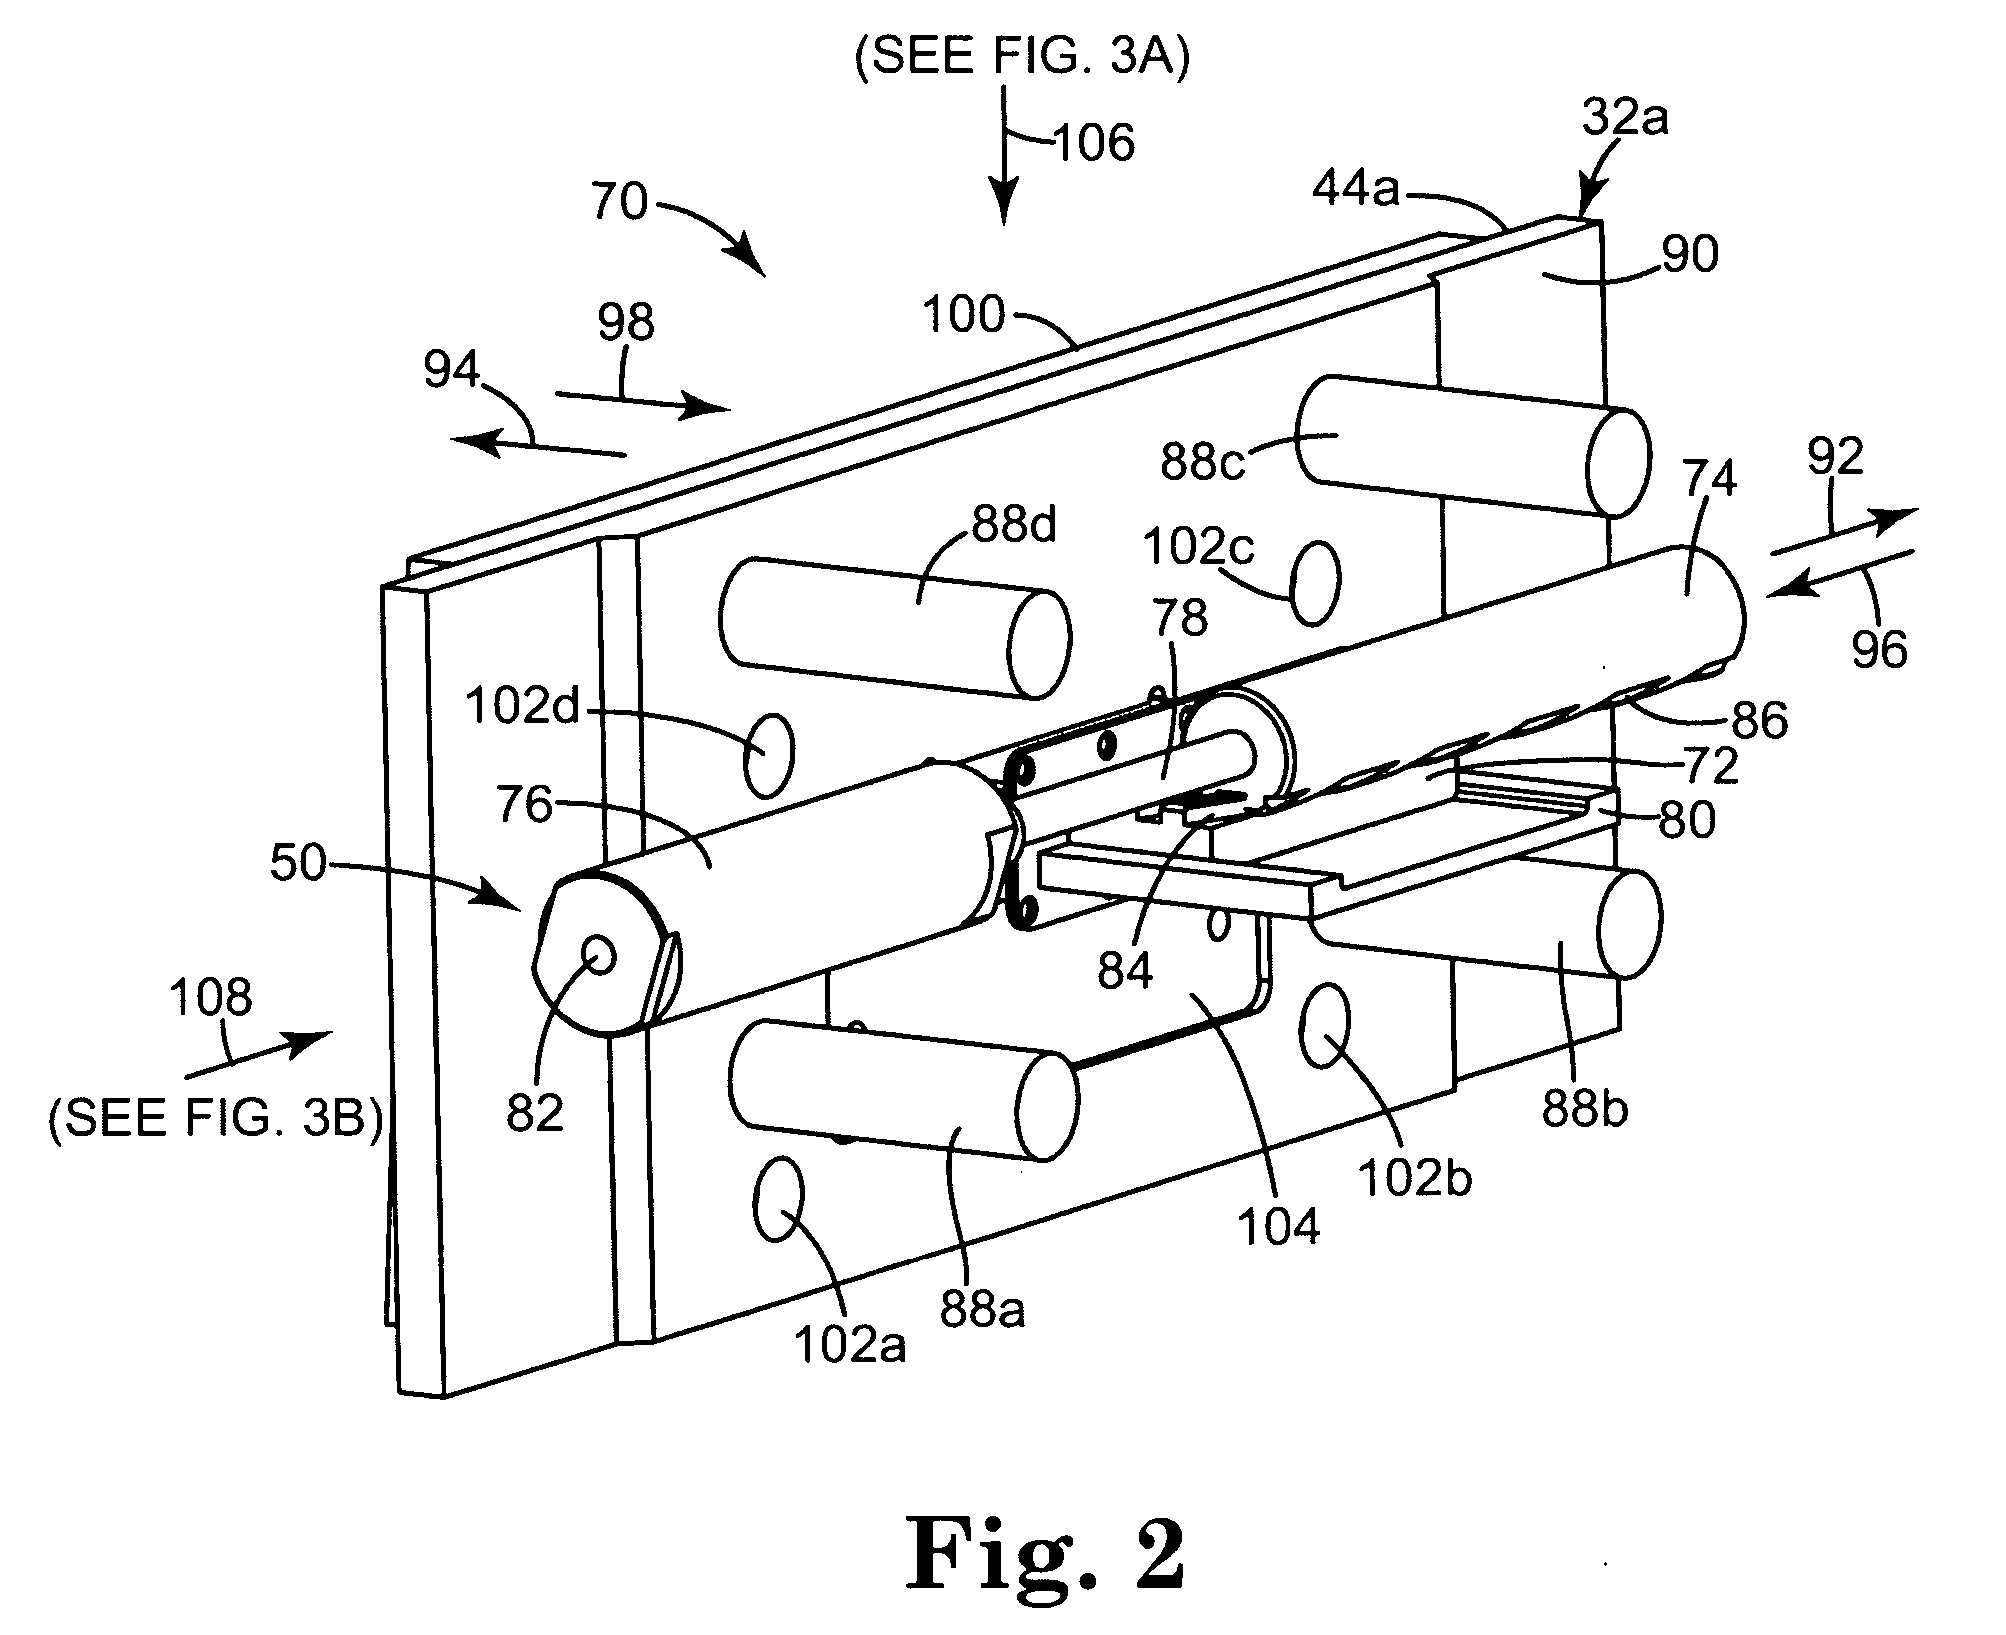 Apparatus and method for forming retaining wall blocks with variable depth flanges